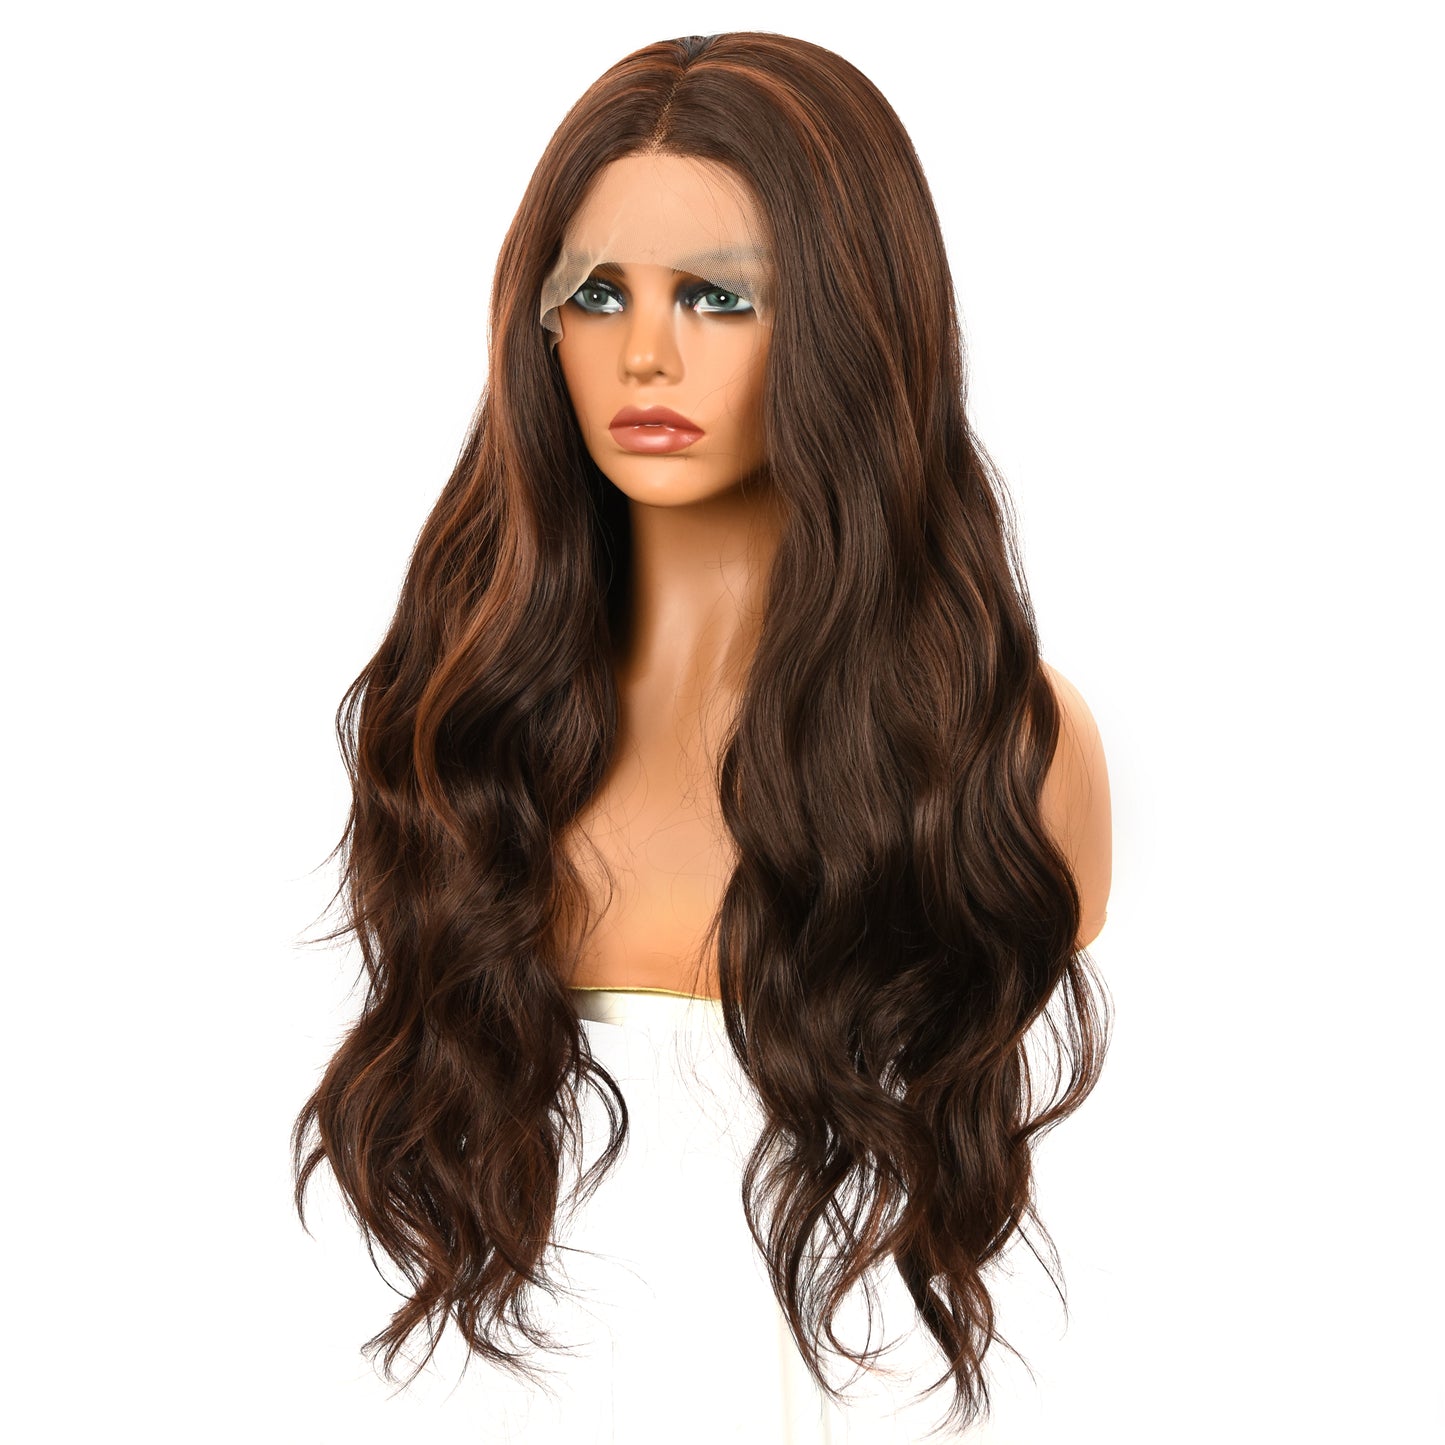 Winter | Brown | Curly  Hair | Lace Front | 28 Inches | SML717 | Apn Popinrow